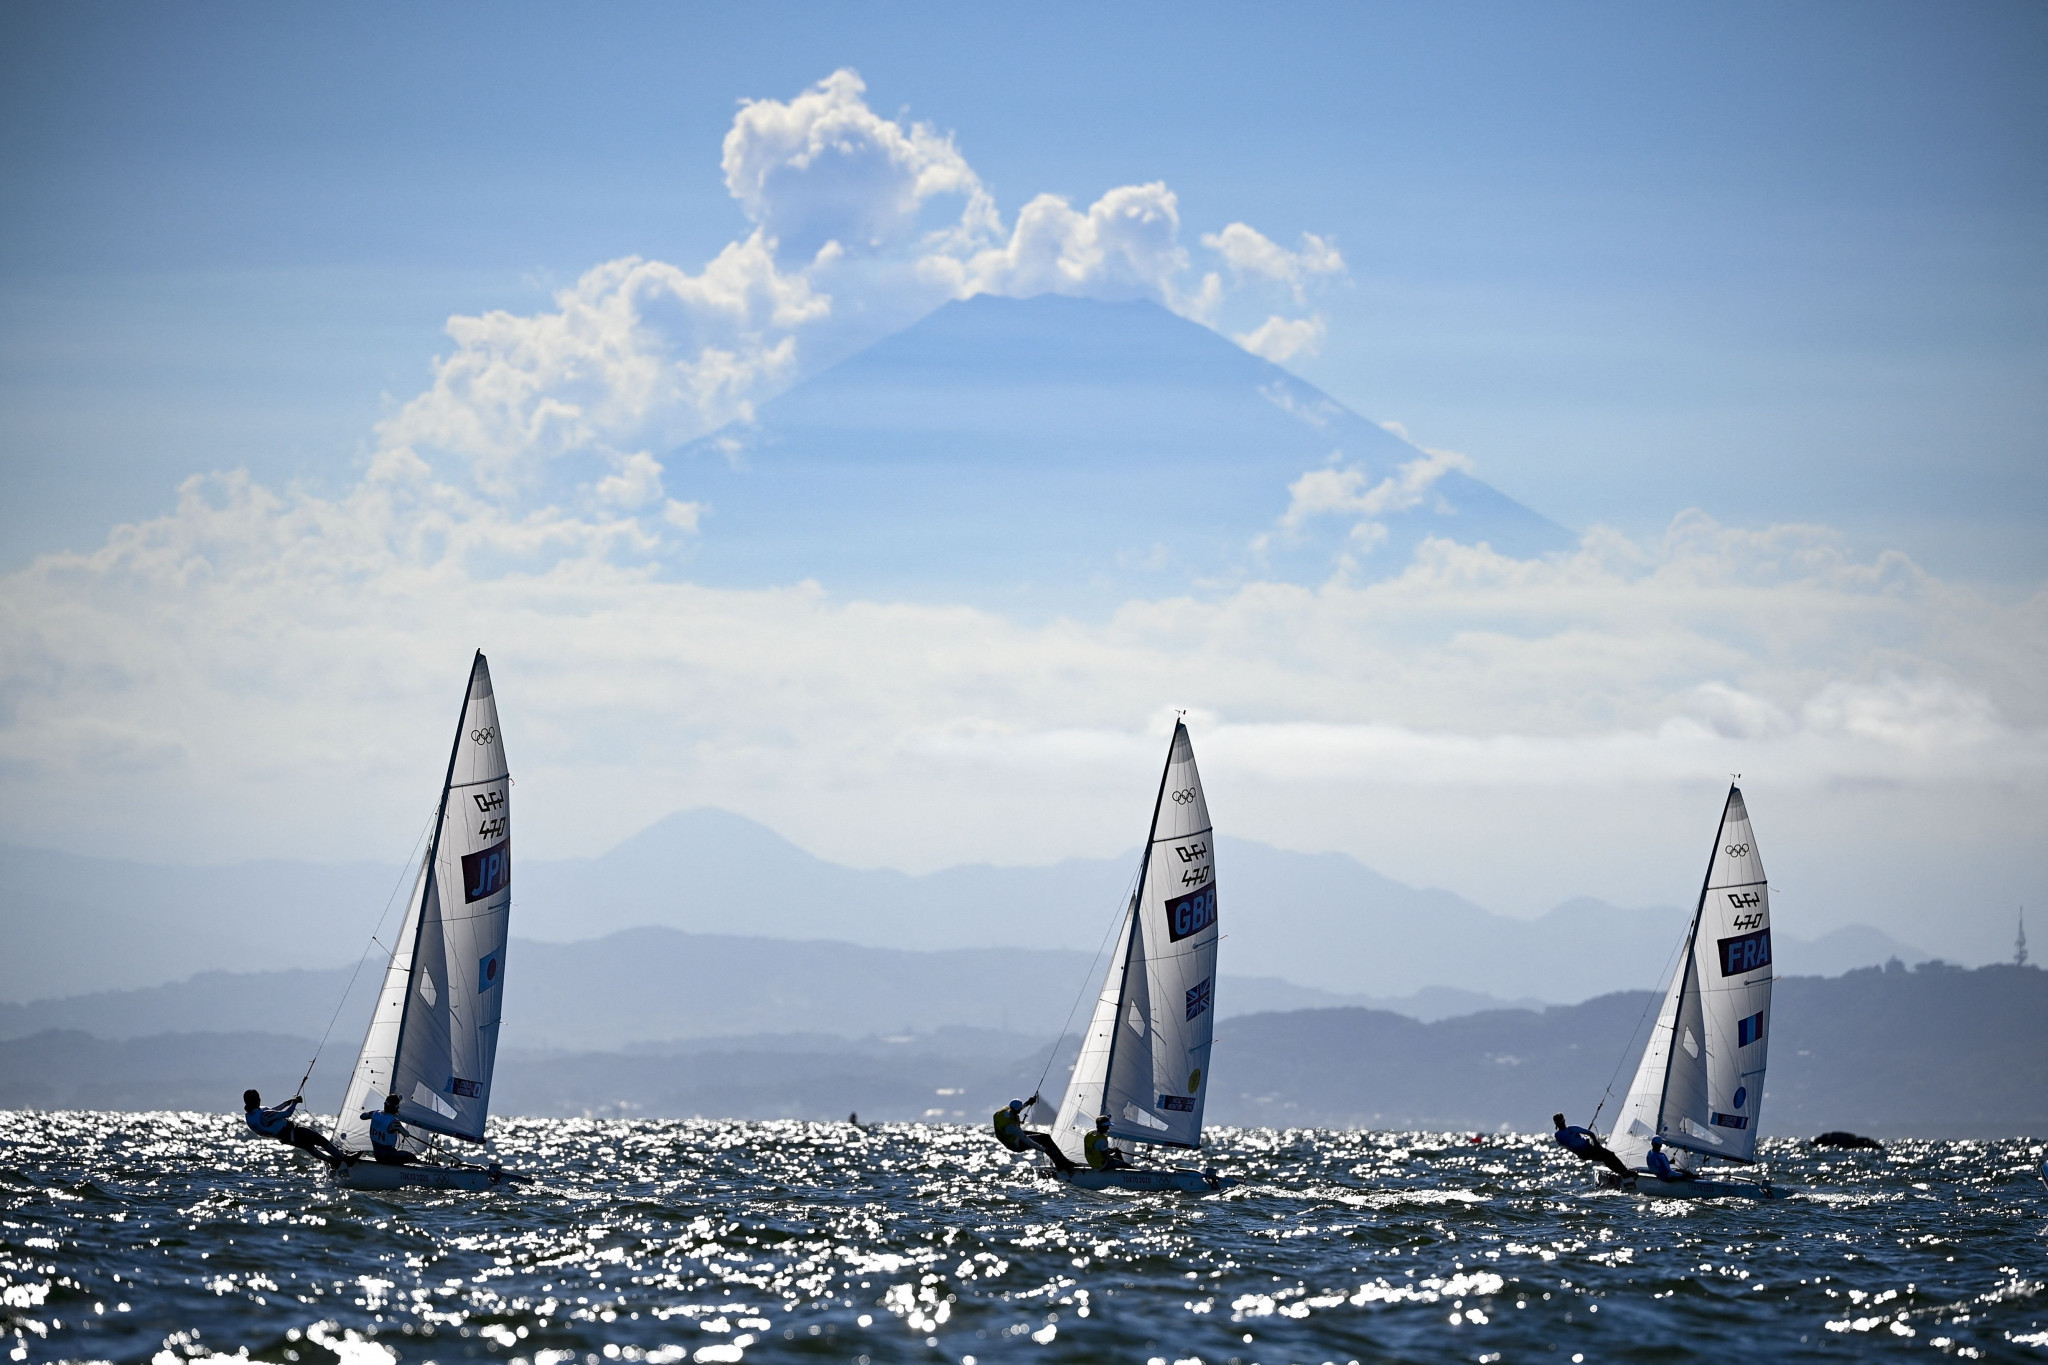 World Sailing is set to work with several Italian clubs located on Lake Garda, subject to contract being agreed ©Getty Images